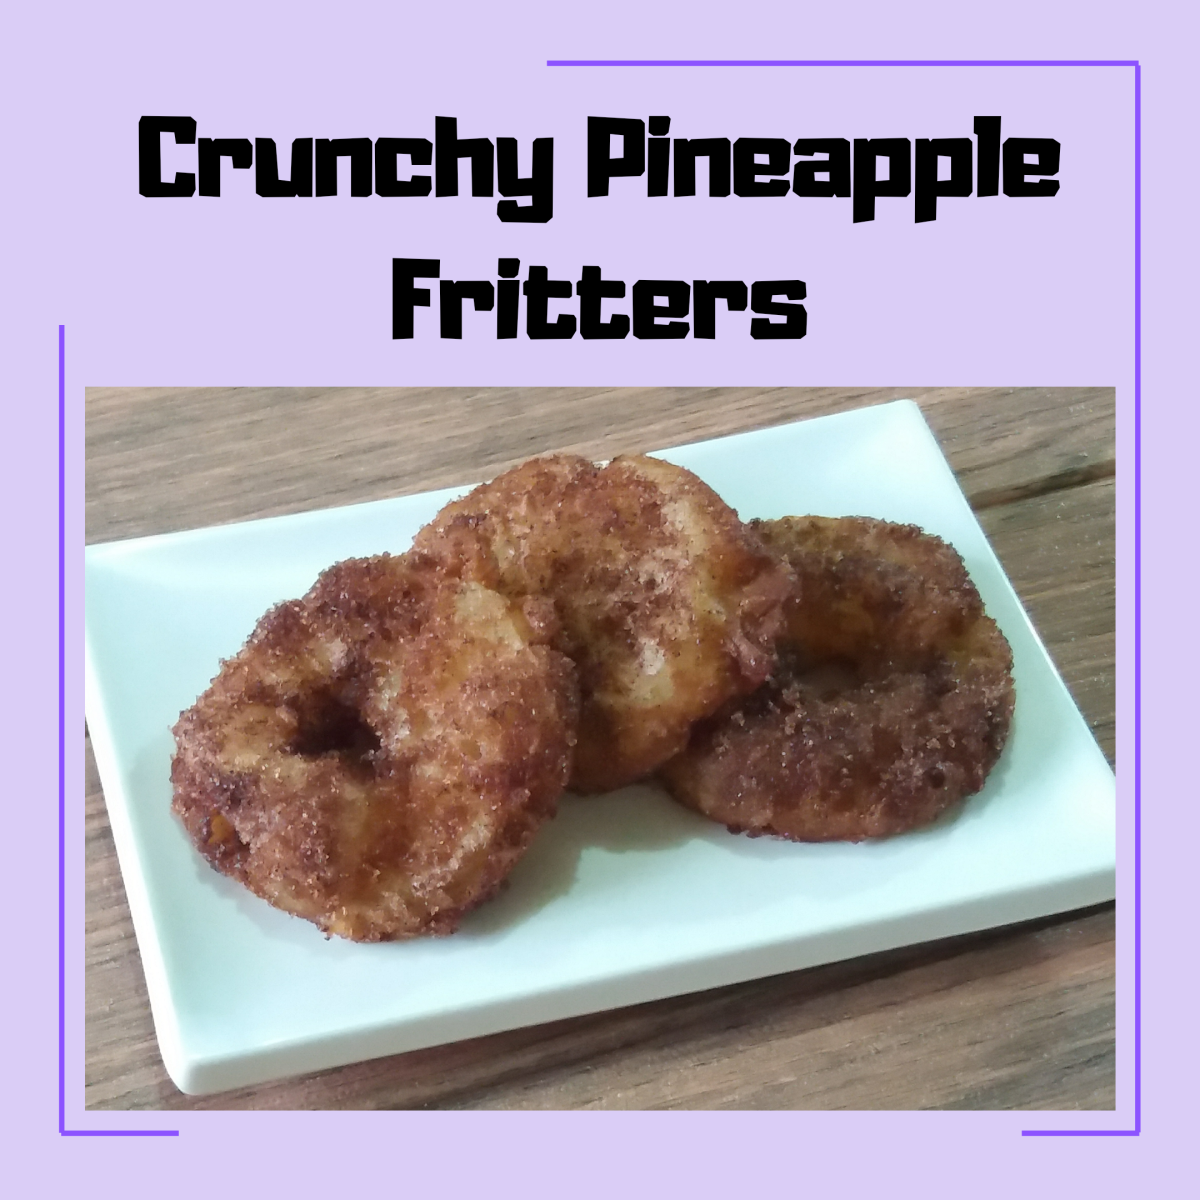 Crunchy pineapple fritters